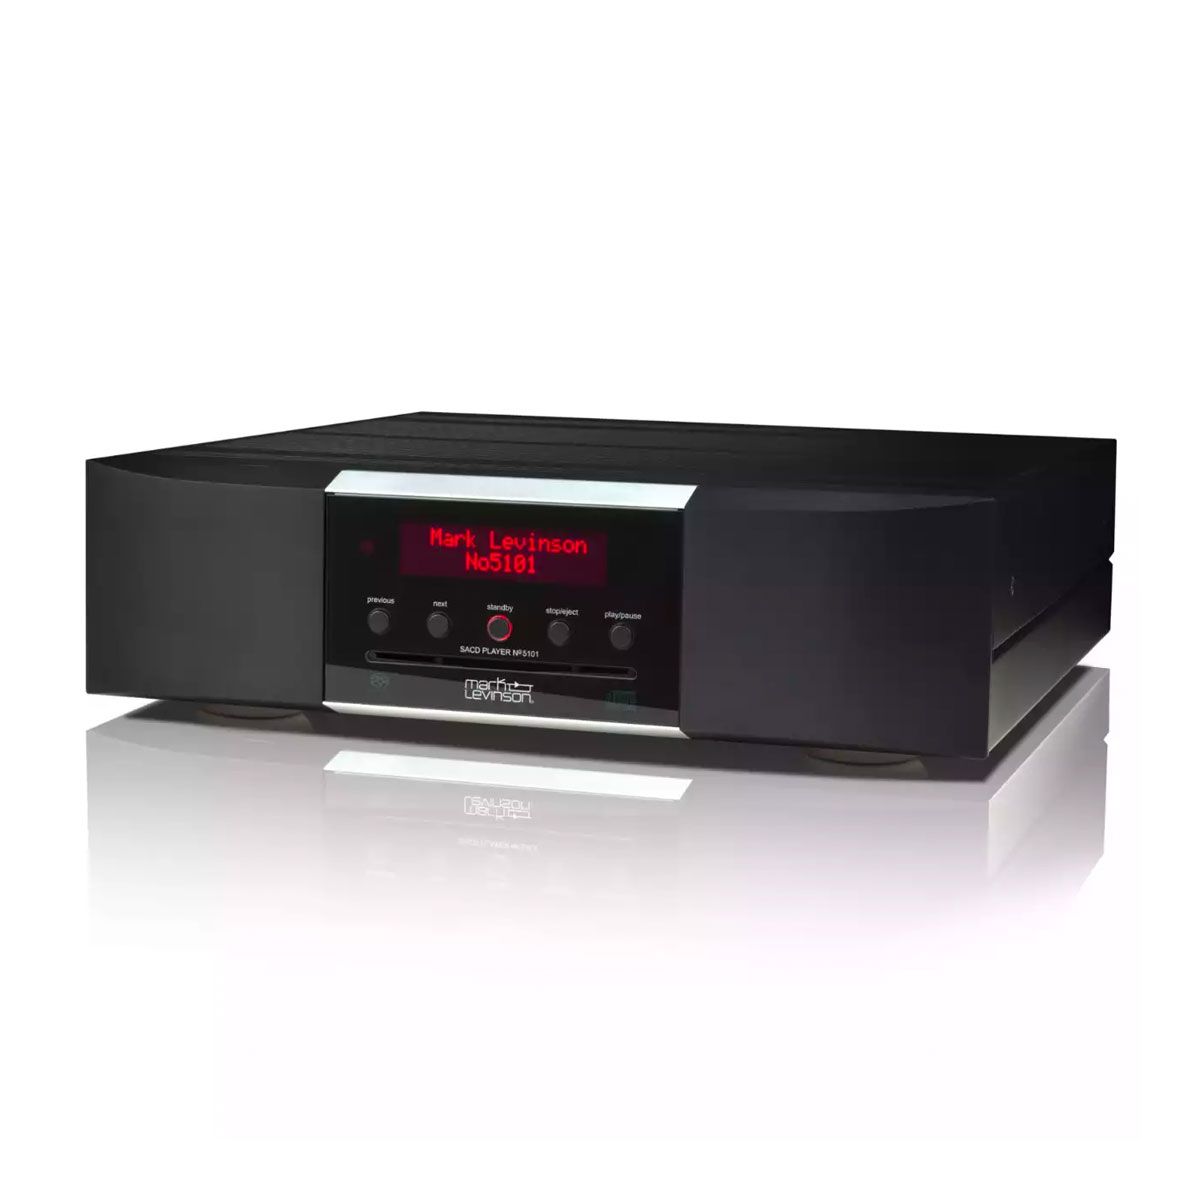 With a bold new industrial design, the Nº5101 delivers fidelity with premium features and flexibility. Combining physical compact disc formats with high-resolution network streaming capabilities over Ethernet and WiFi, PrecisionLink II DAC and expansive control features, the Nº 5101 is a unique 3-in-1 solution.